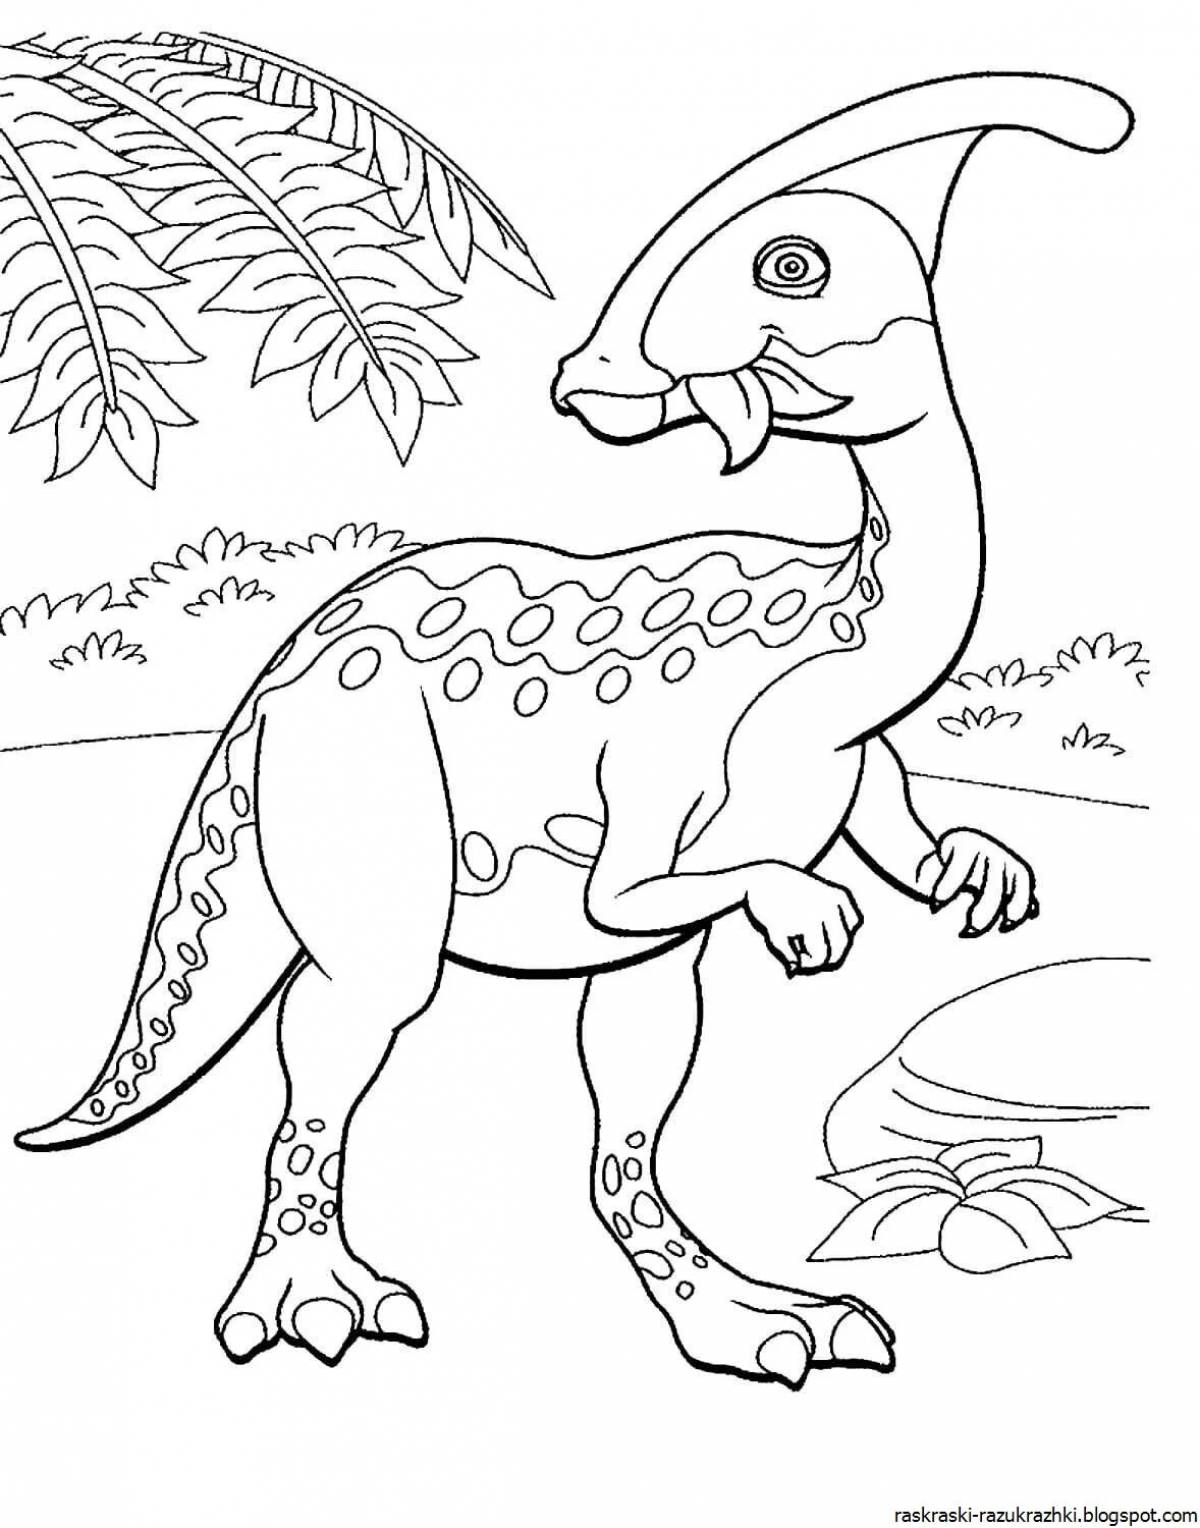 Dinosaurs for 5 year olds #14